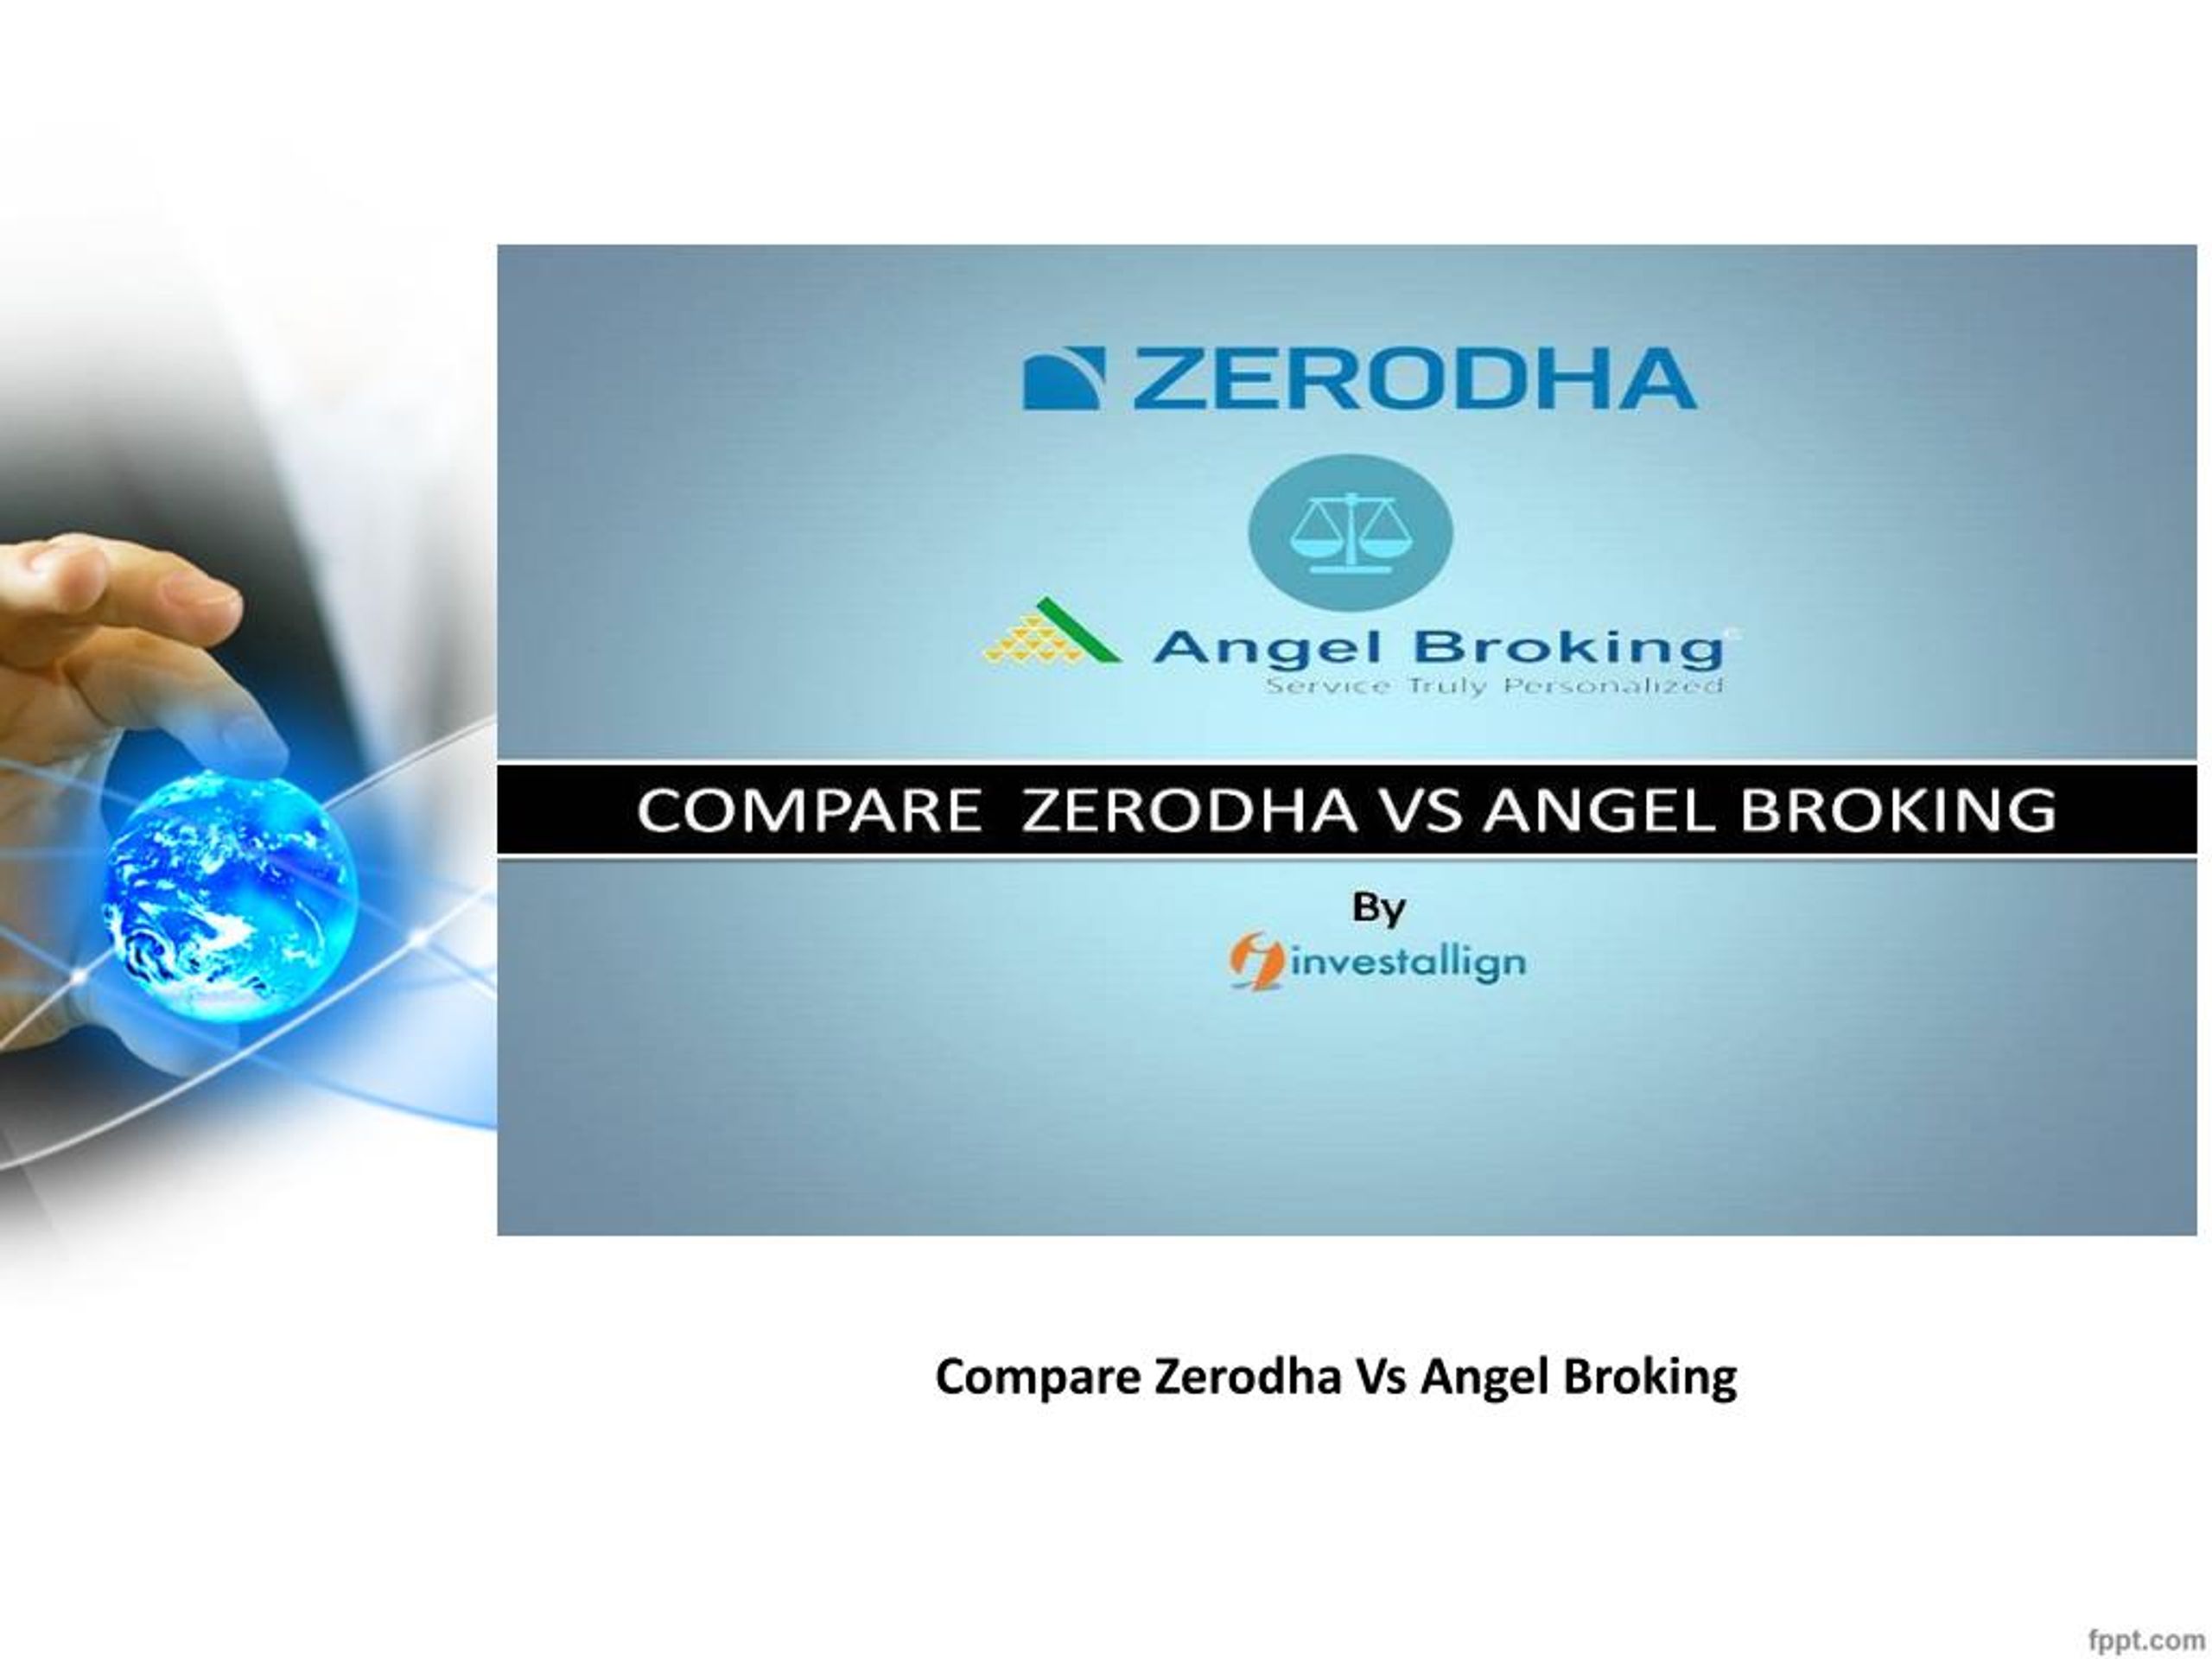 PPT - Compare Zerodha vs Angel Brokerage Charges ...